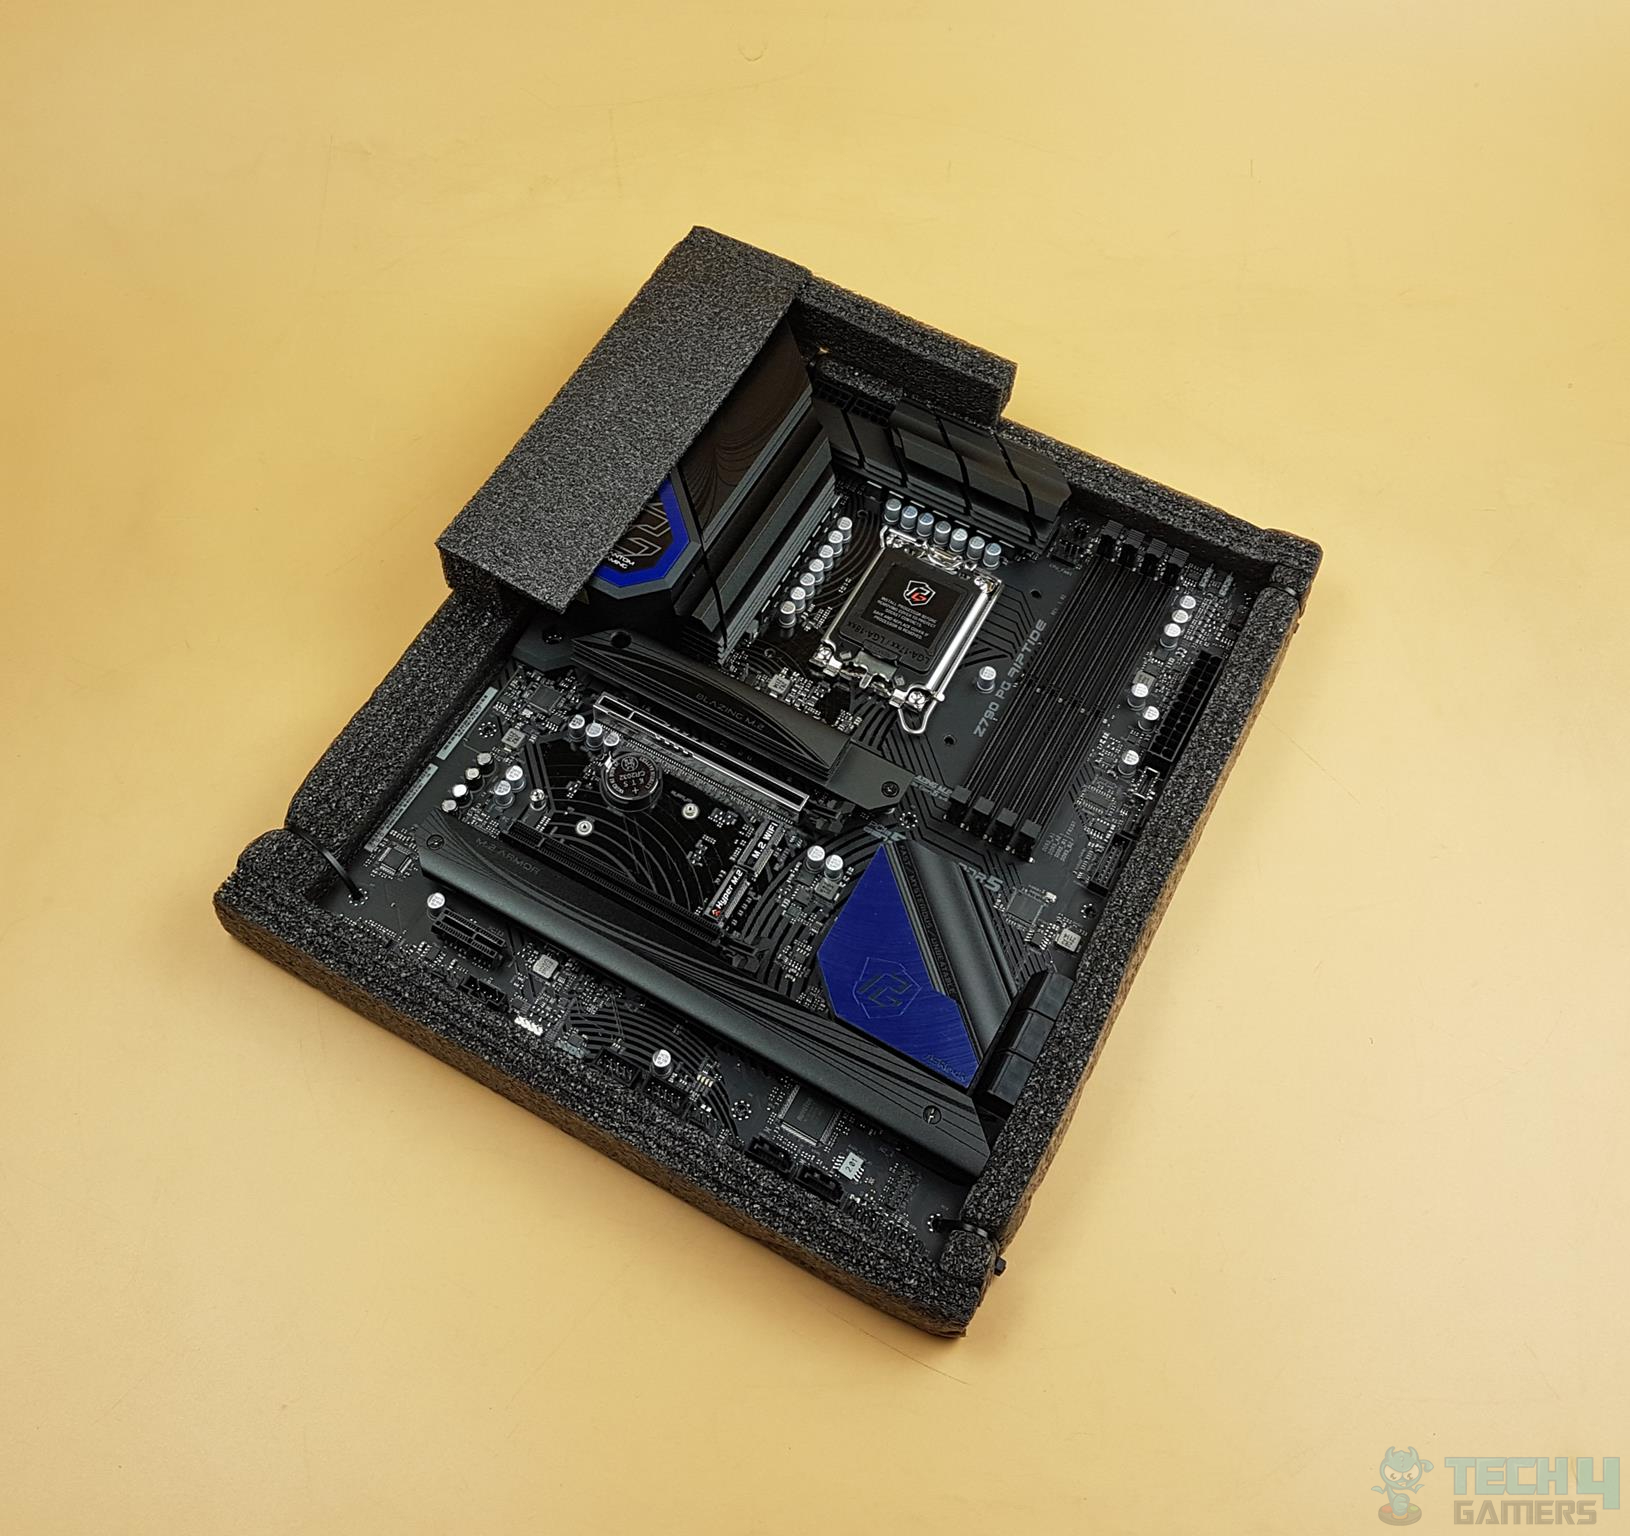 ASRock Z790 PG Riptide — The motherboard in all its glory